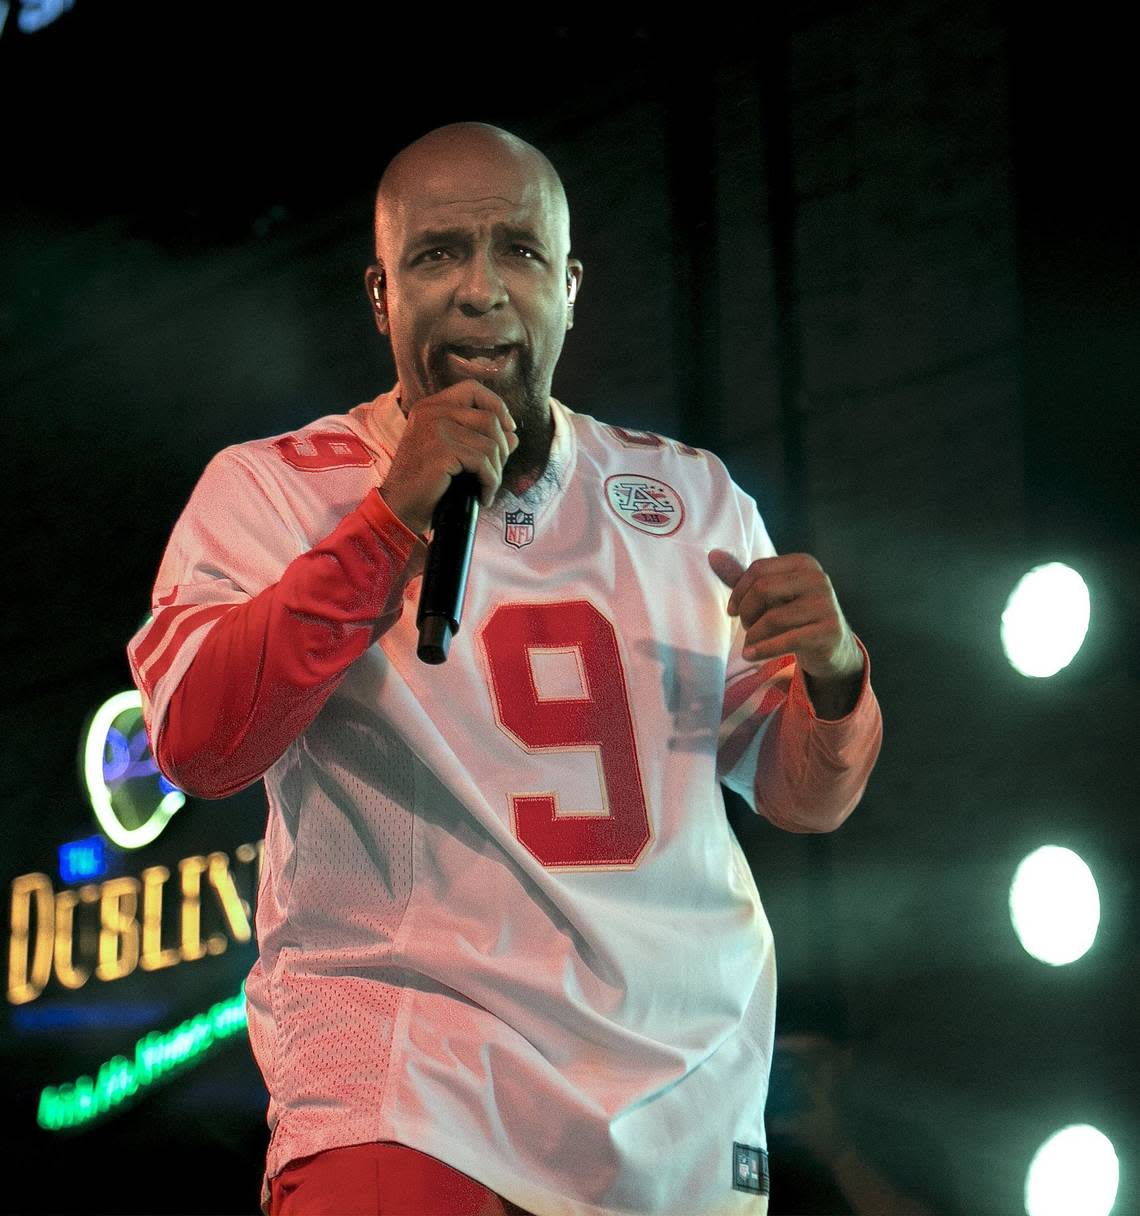 Rap star Tech N9ne of Kansas City will perform March 31 at the Granada in Lawrence.